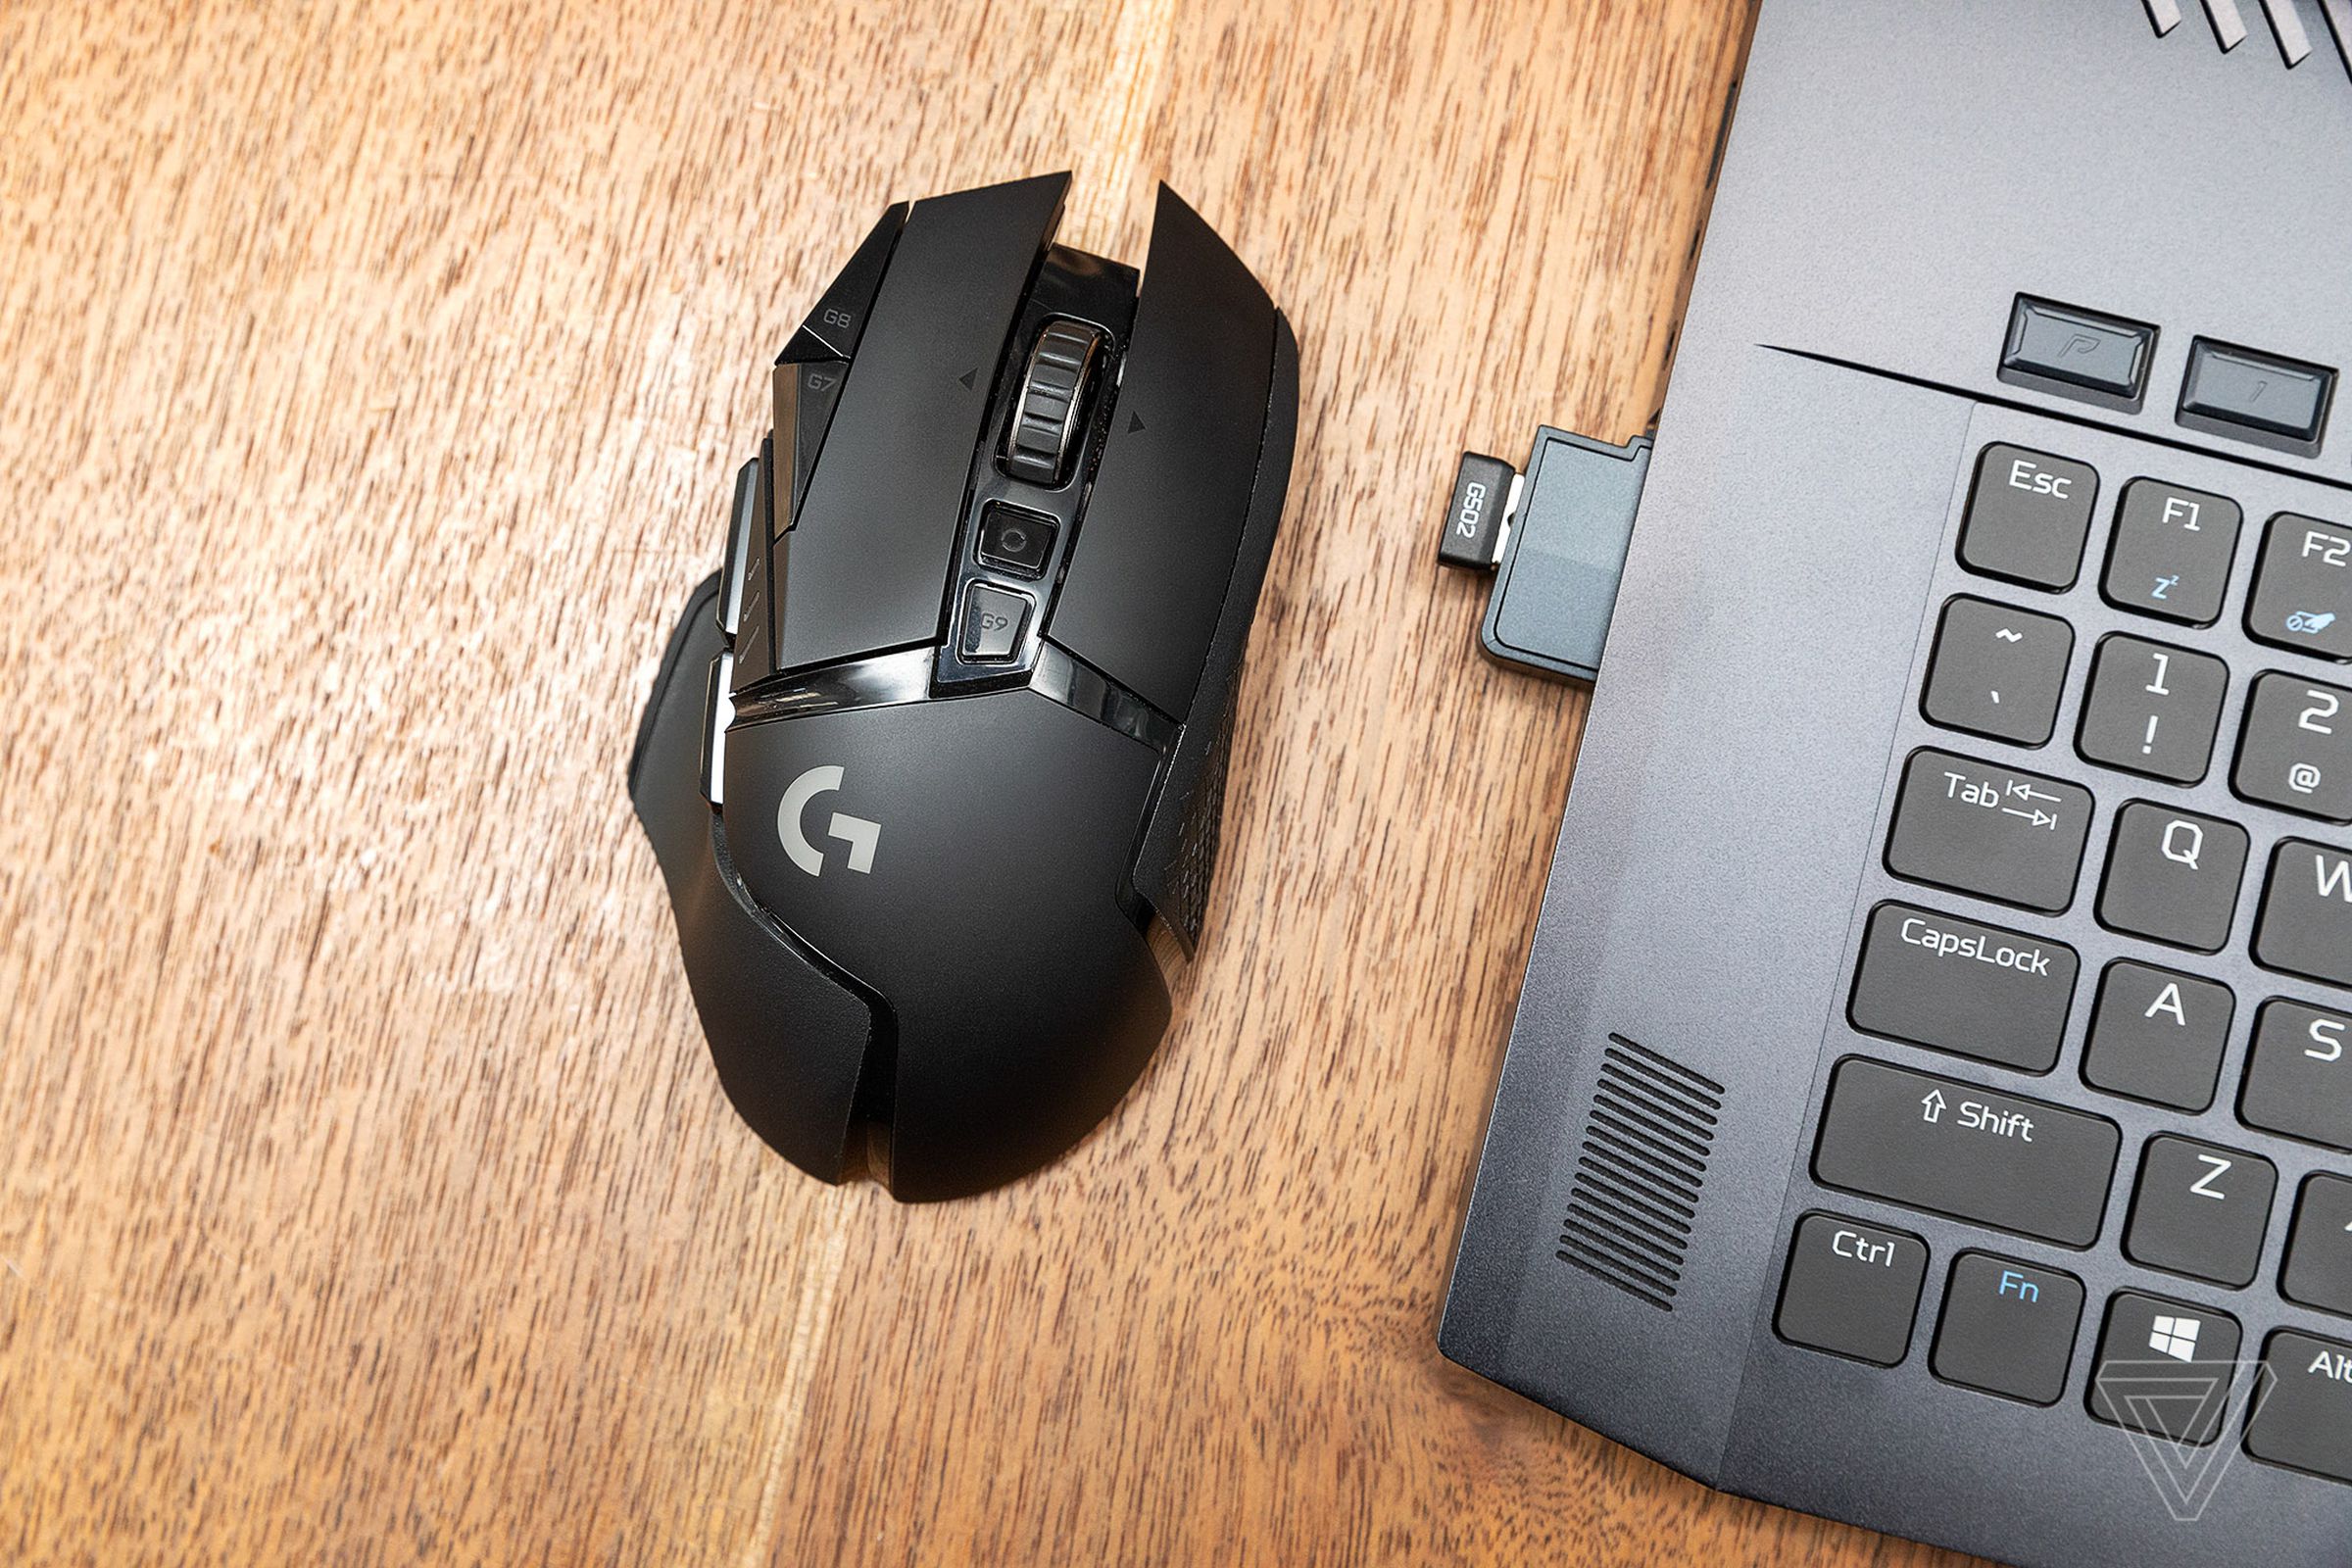 The Triton 900 has a flip-out USB 2.0 port that’s ideal for hiding your mouse or controller’s wireless dongle.